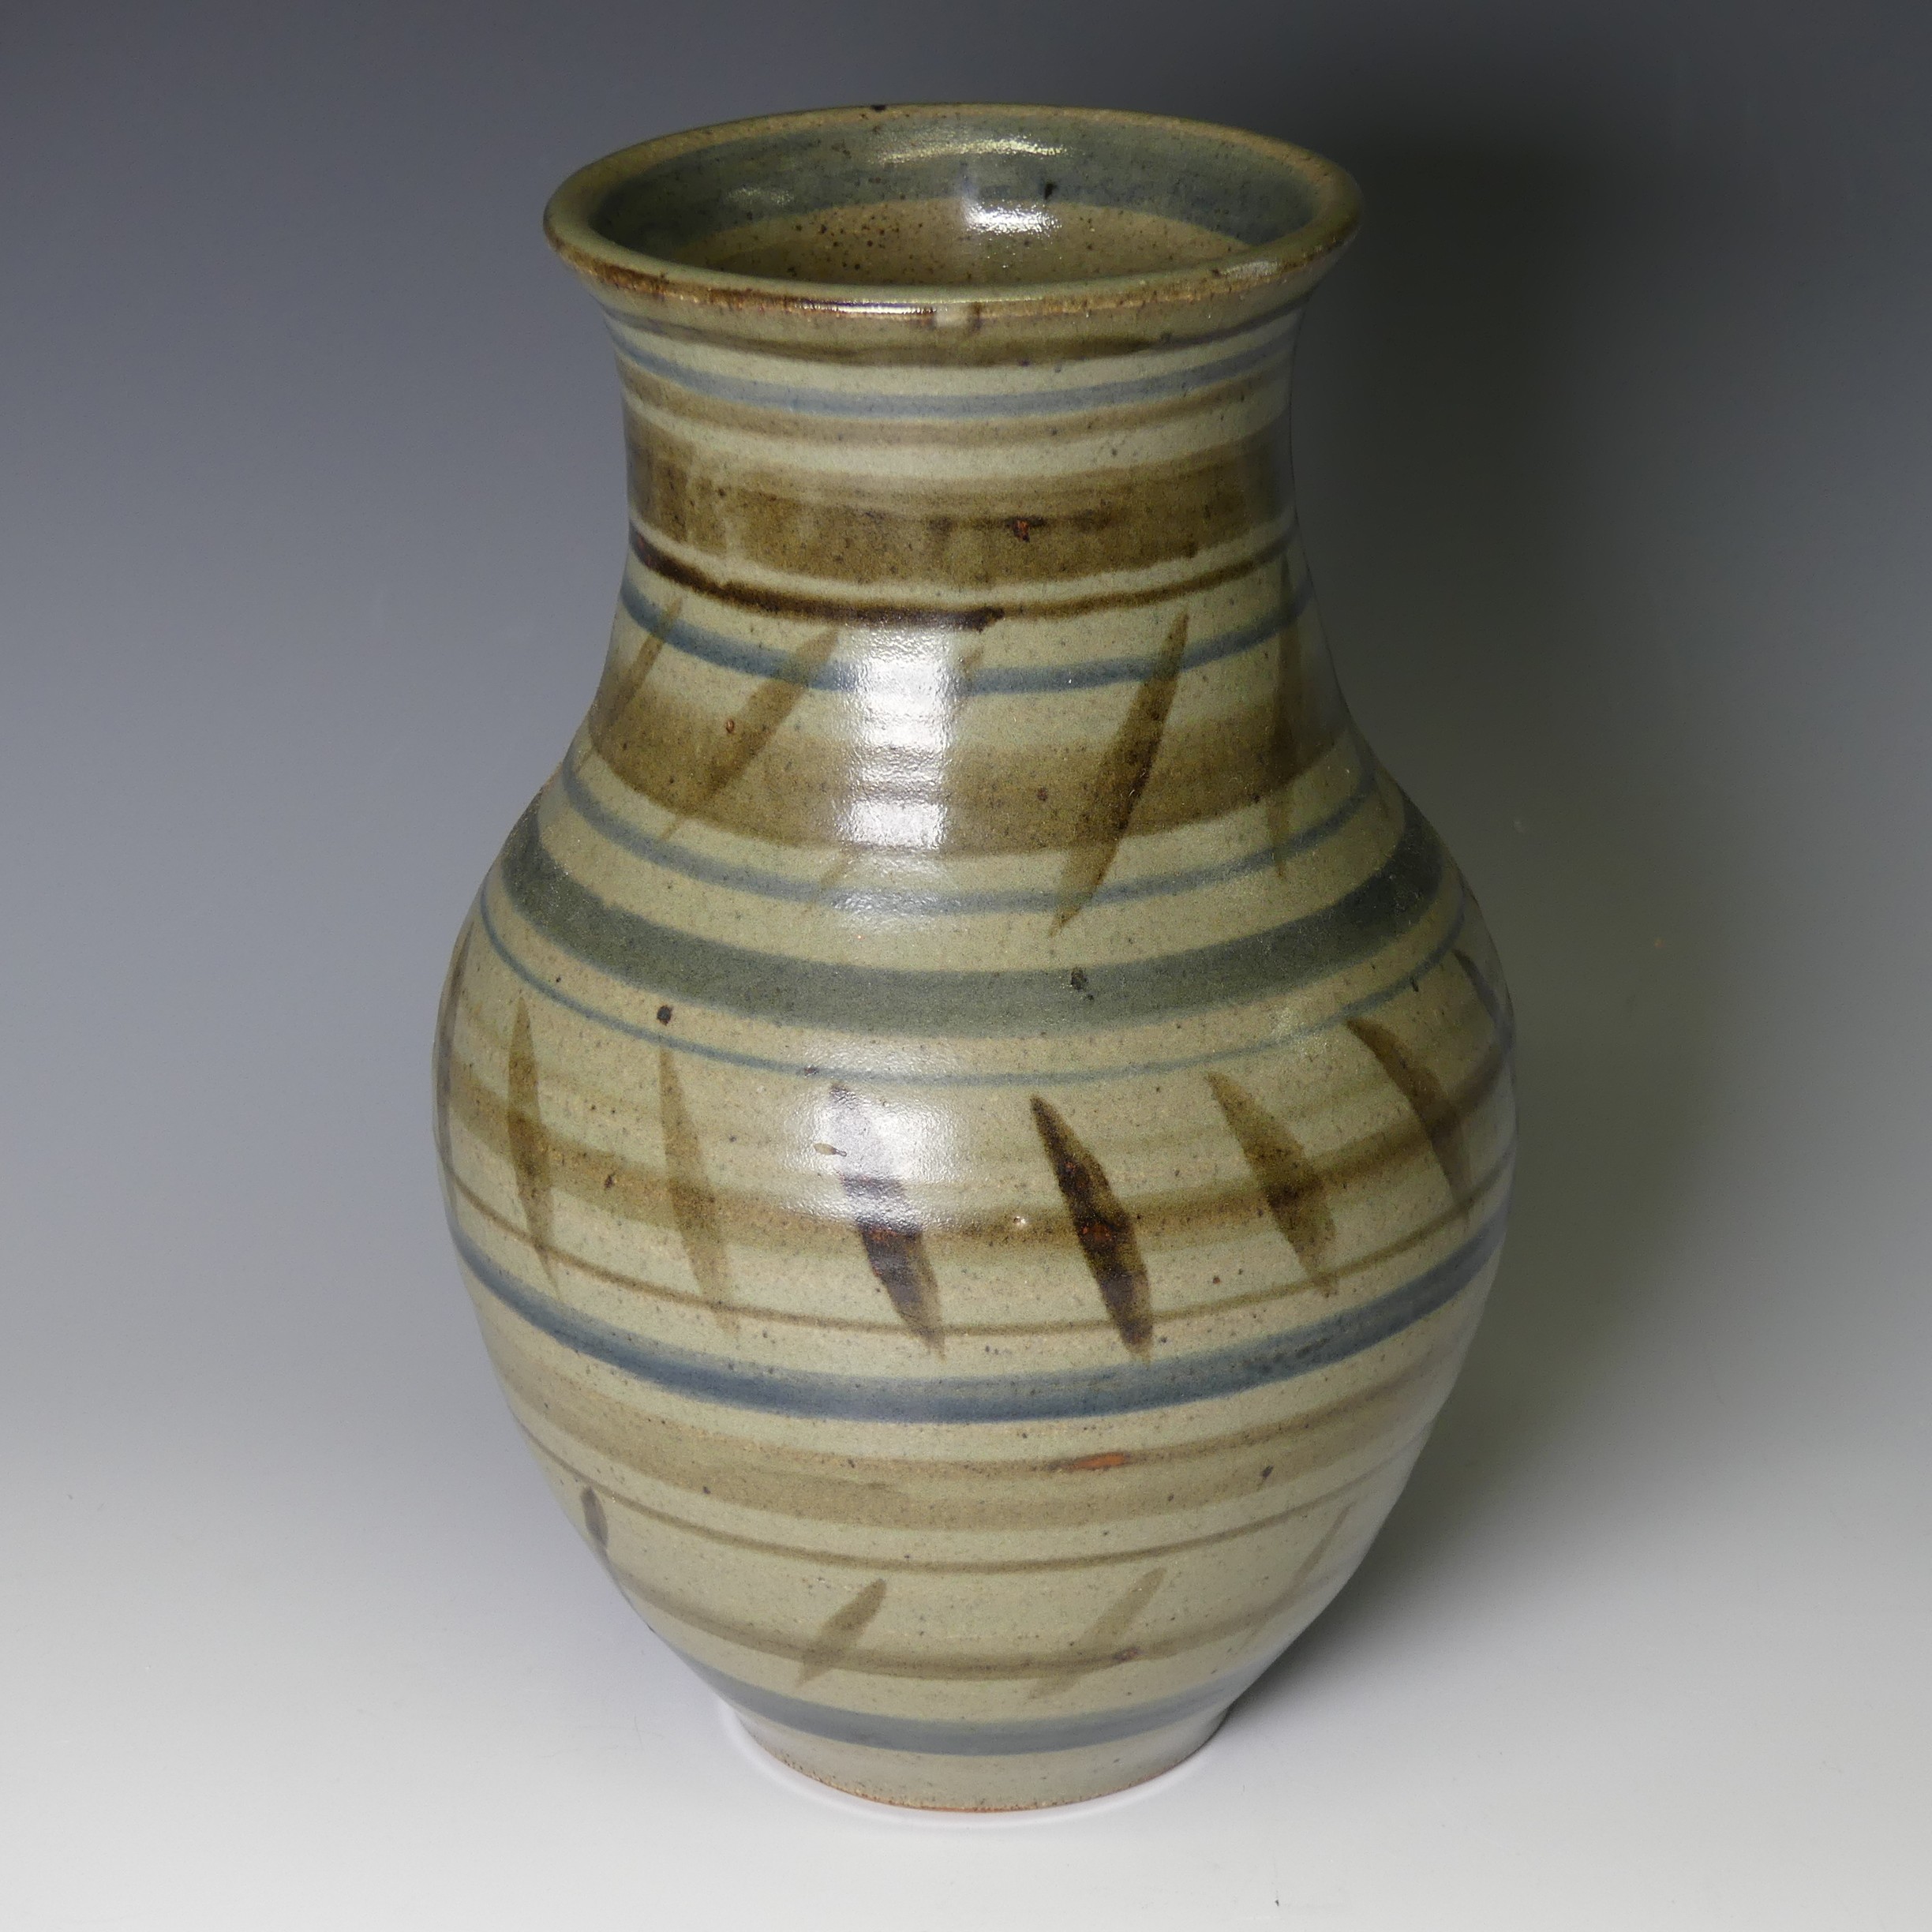 A William Ruscoe studio pottery baluster Vase, decorated in brown and blue banding, with signature